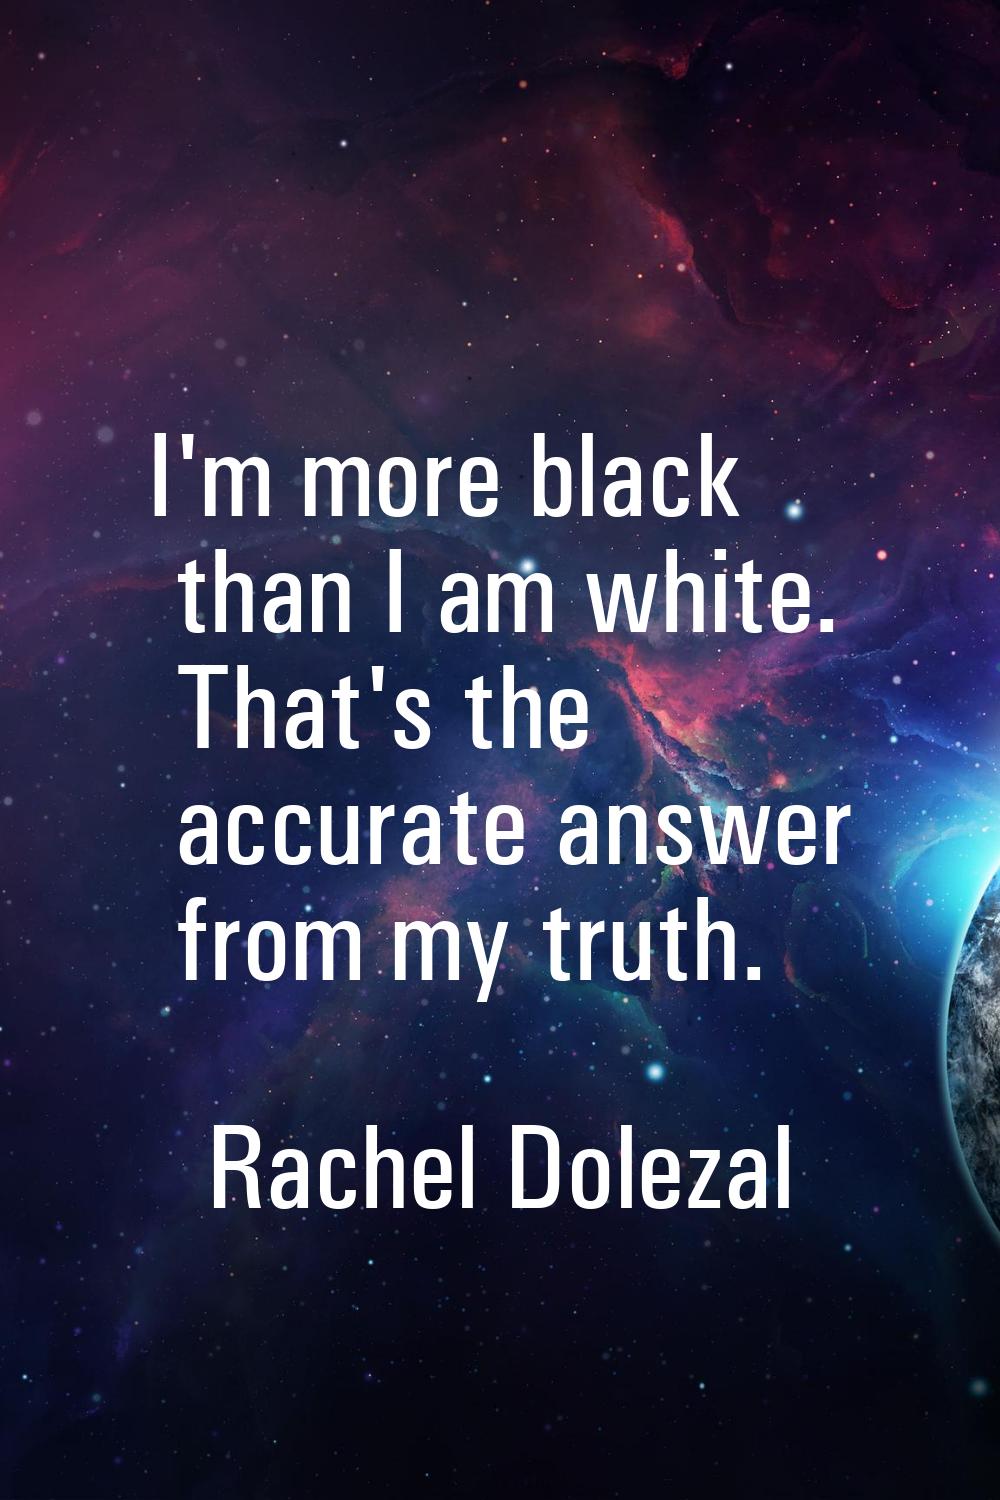 I'm more black than I am white. That's the accurate answer from my truth.